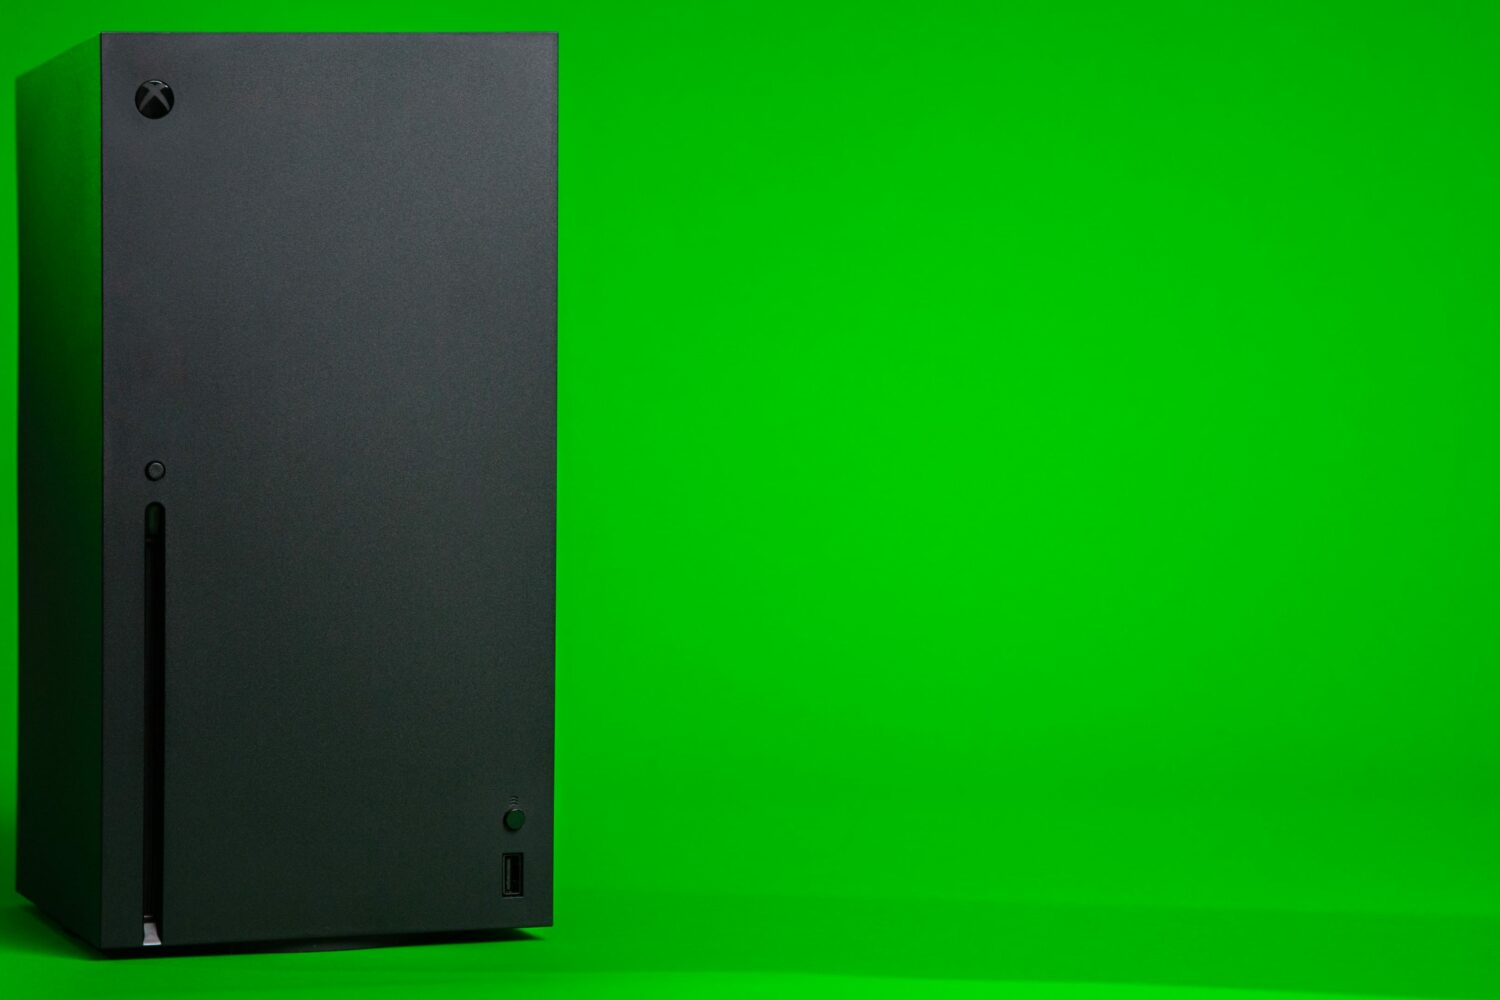 Microsoft's Xbox Series X console in an upright position, set against a green backdrop